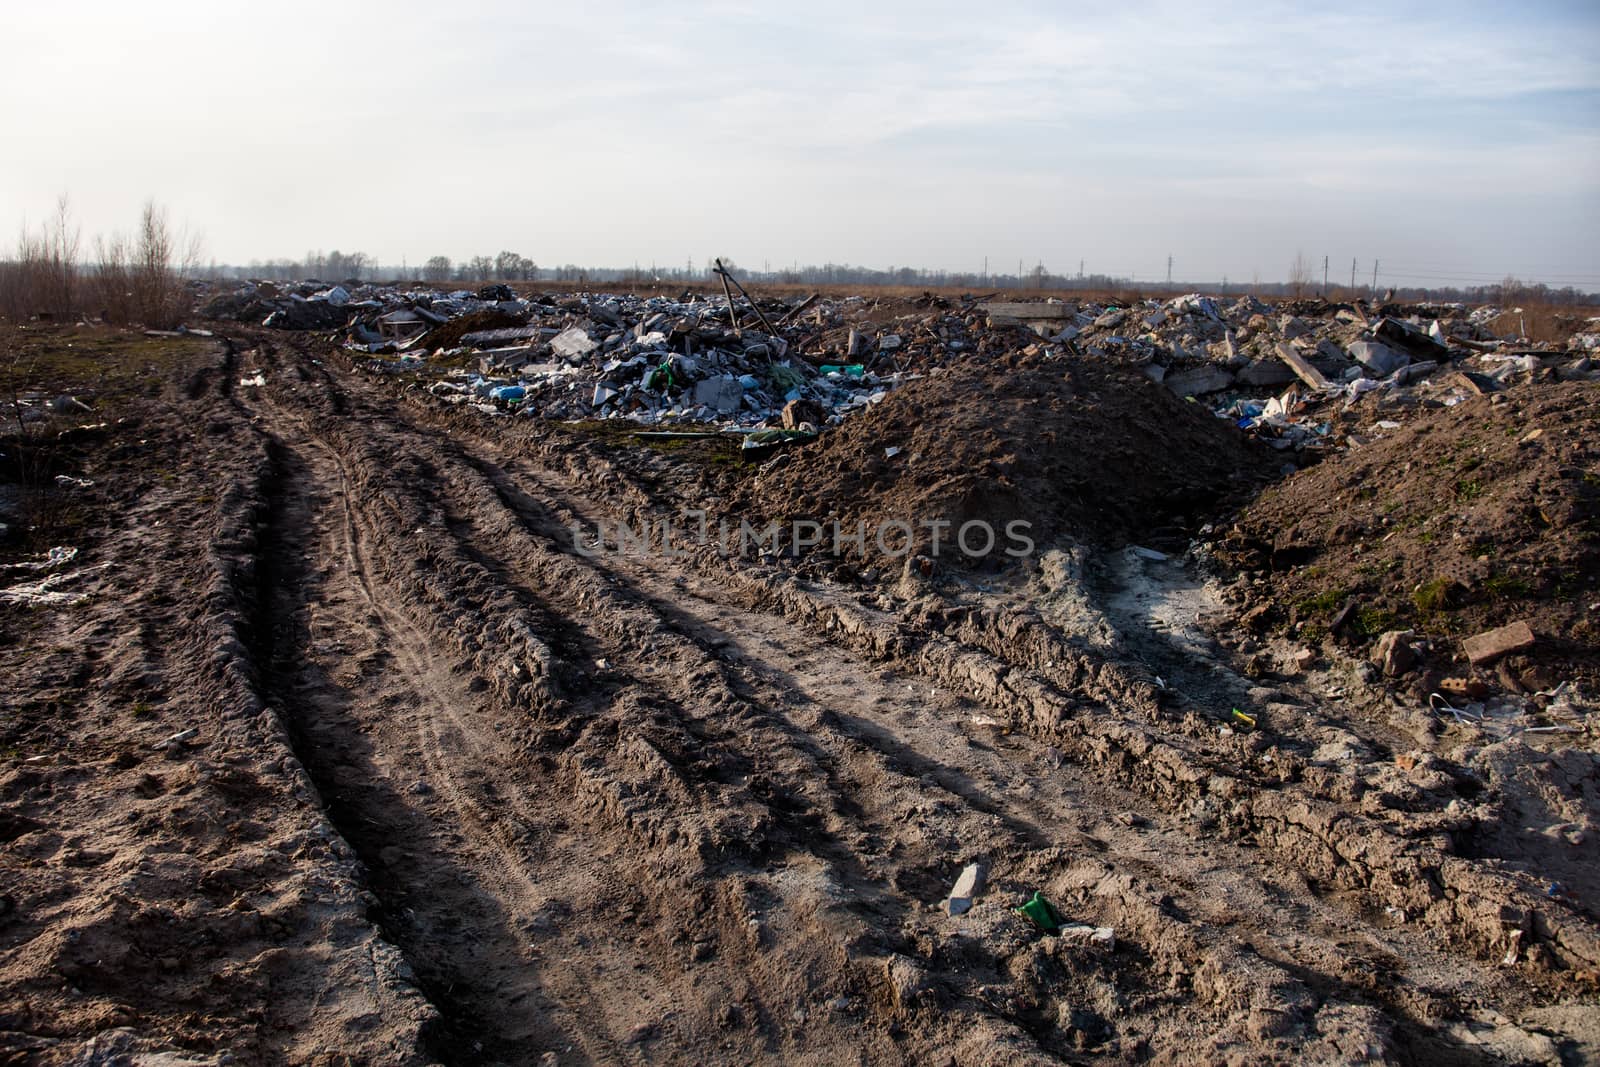 Piles of garbage on the city landfill near the dirt road